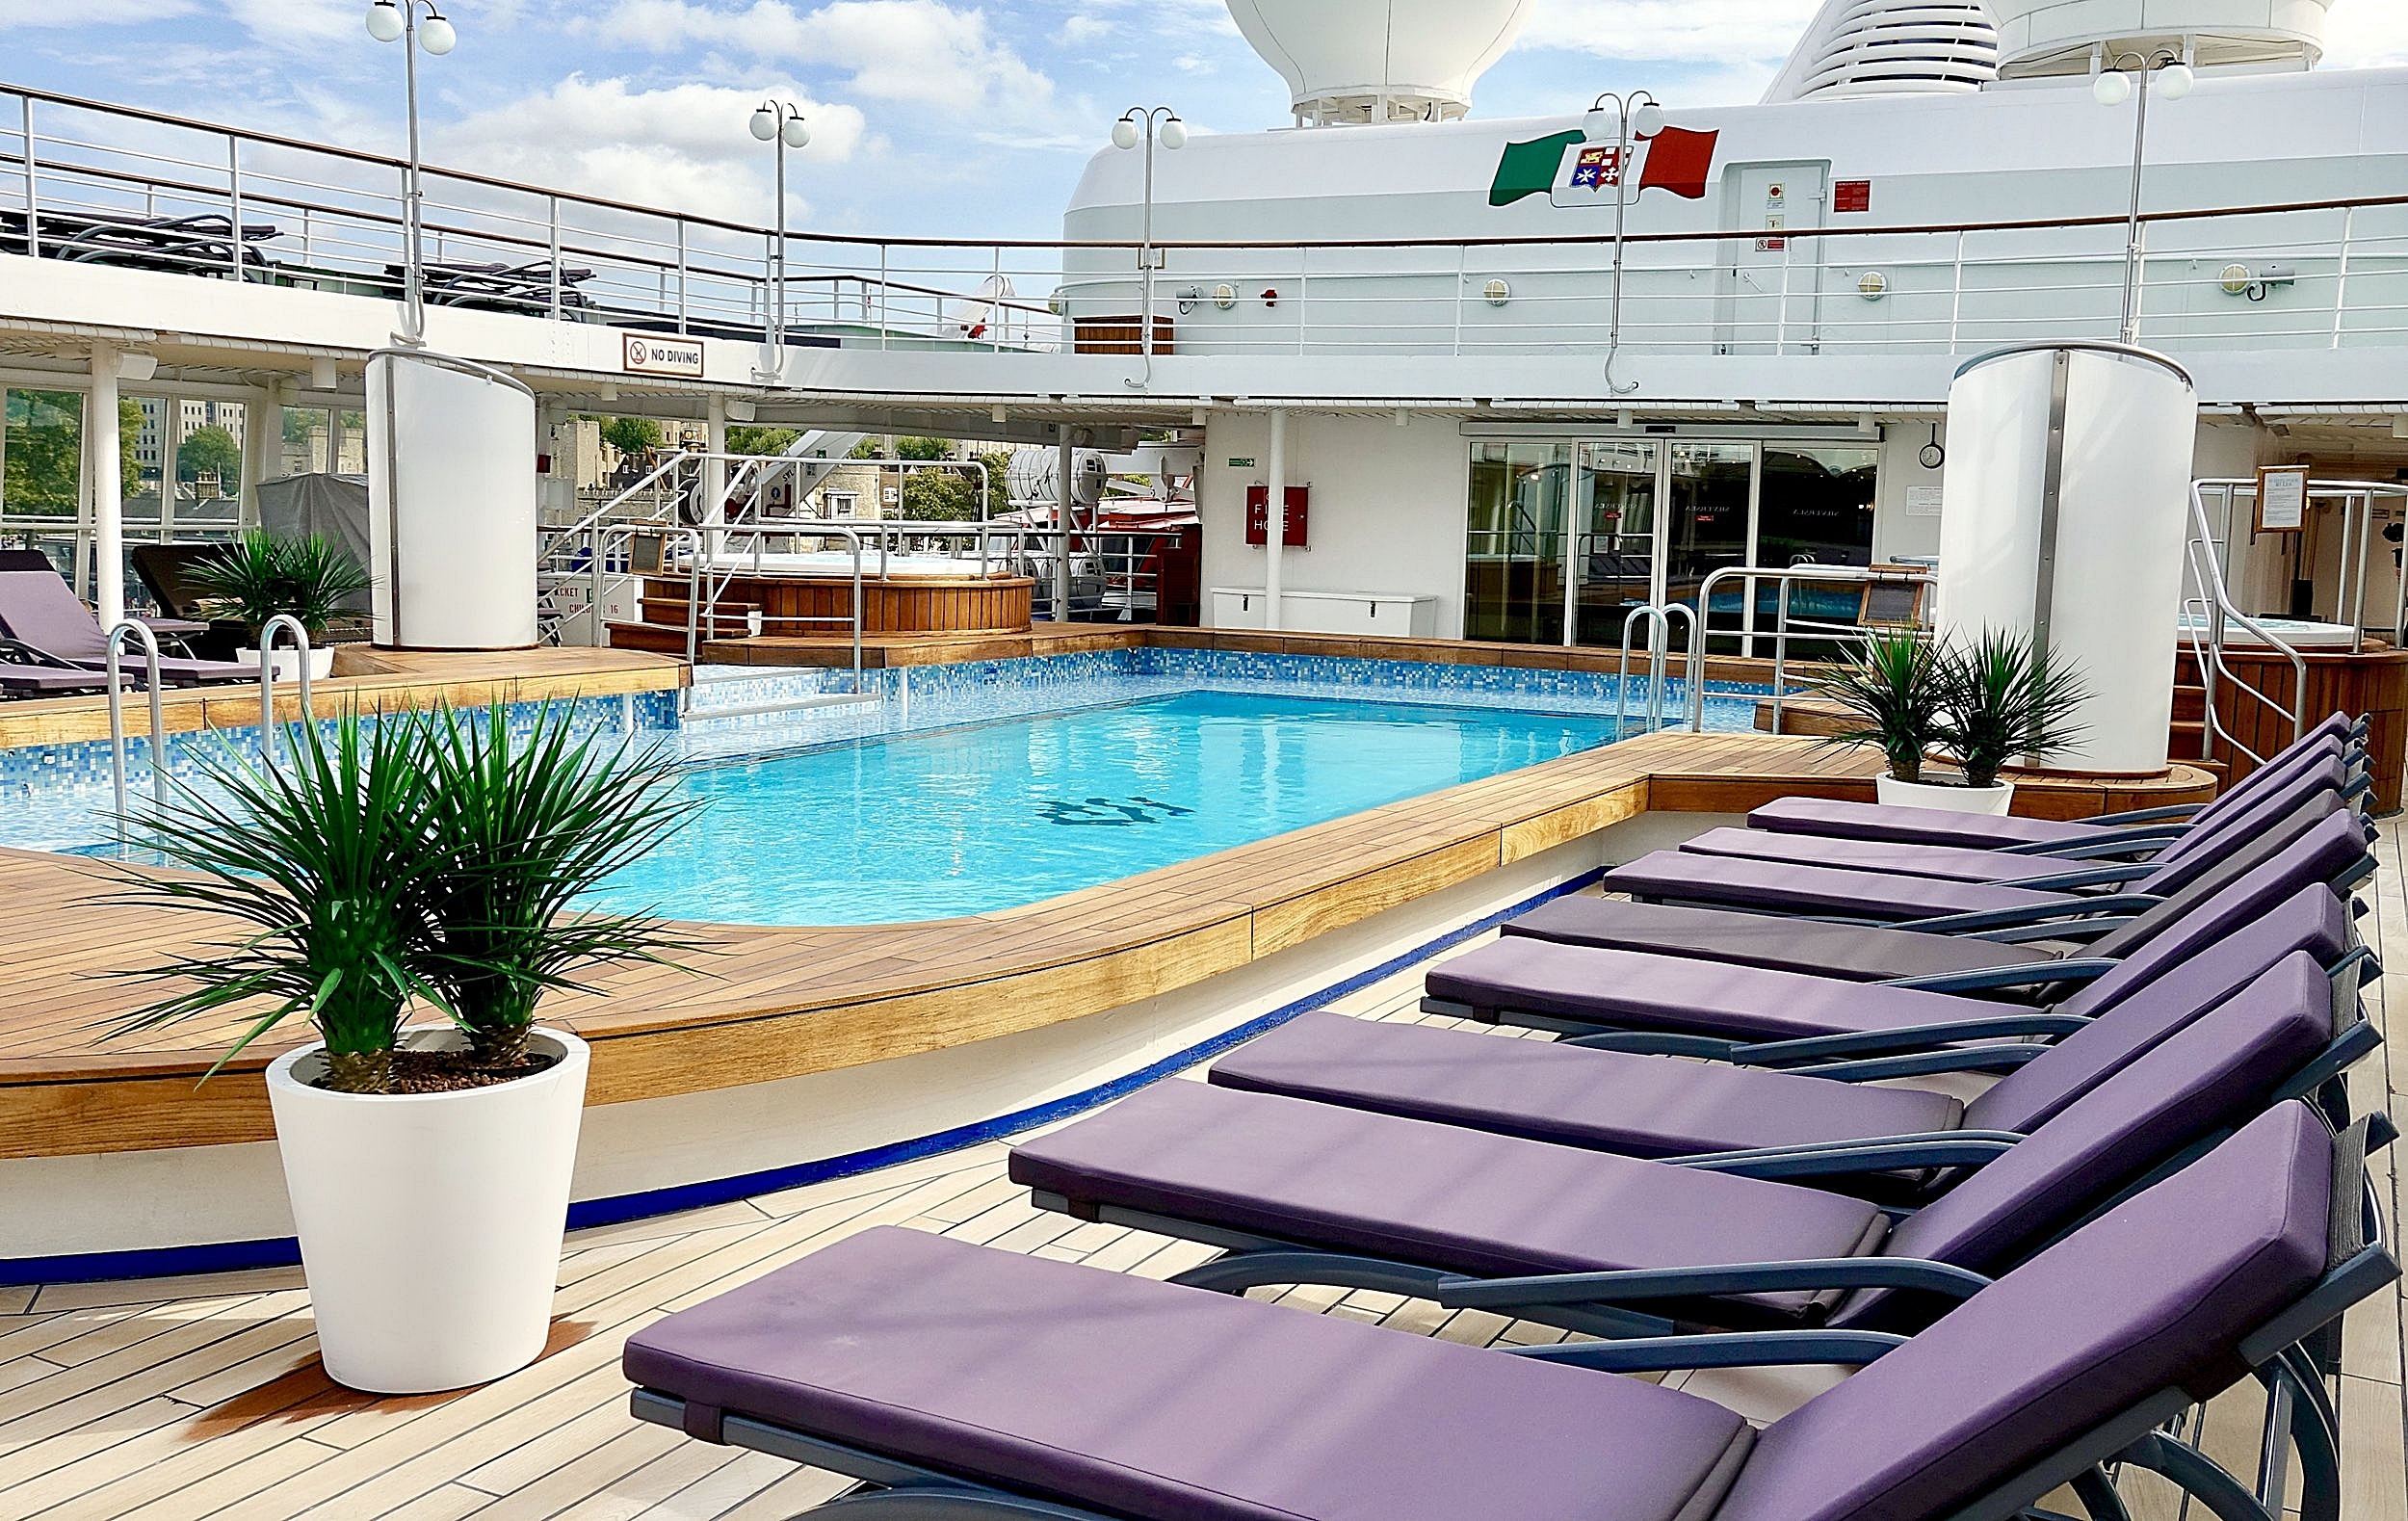  The enticing pool deck.  